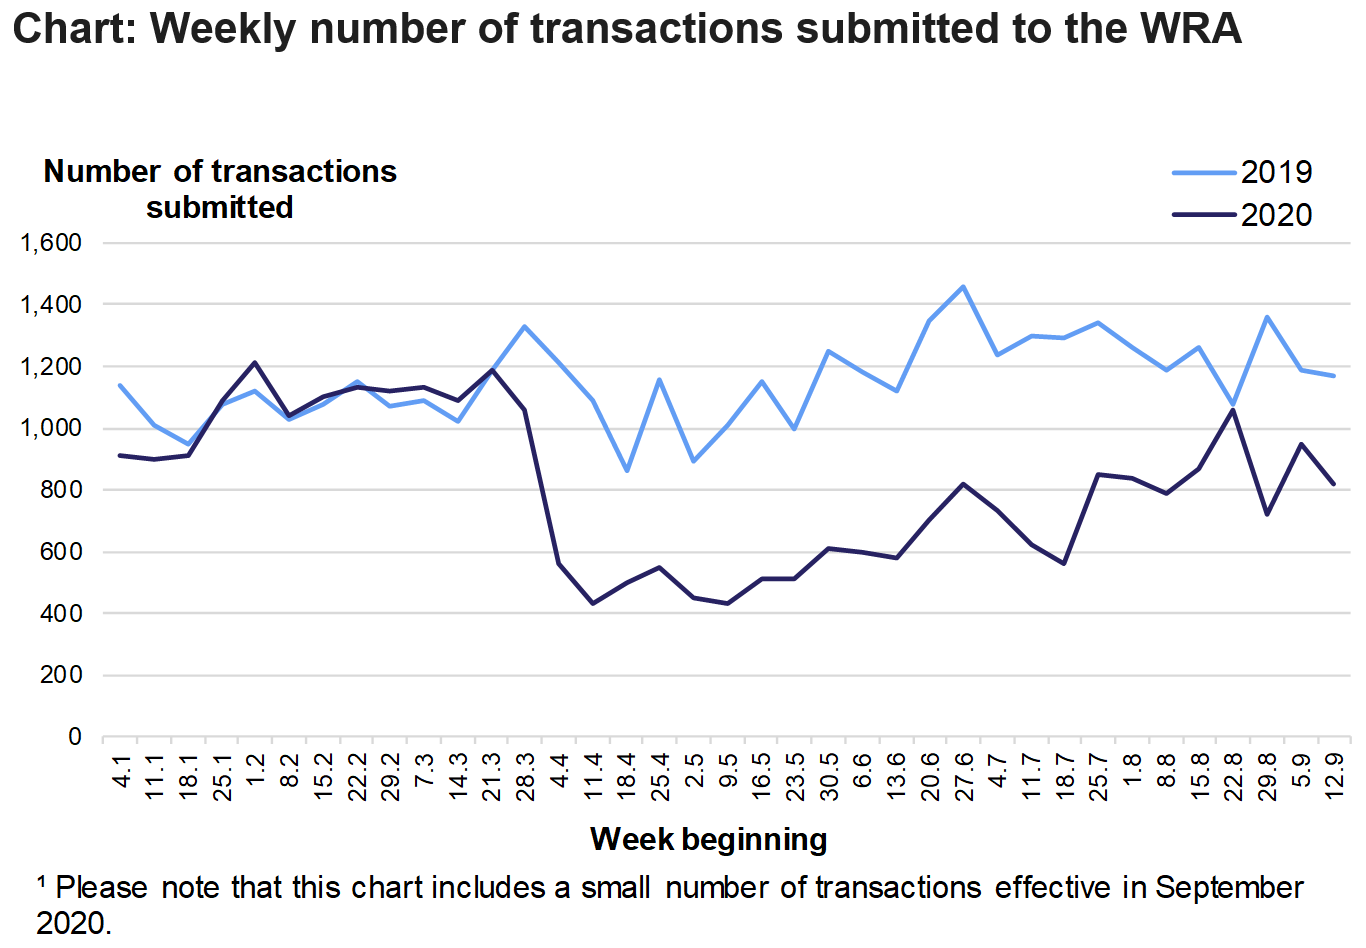 The chart shows the number of residential and non-residential transactions submitted to the WRA each week from January to September, in 2019 and 2020. Please note that this chart includes a small number of transactions effective in September 2020.